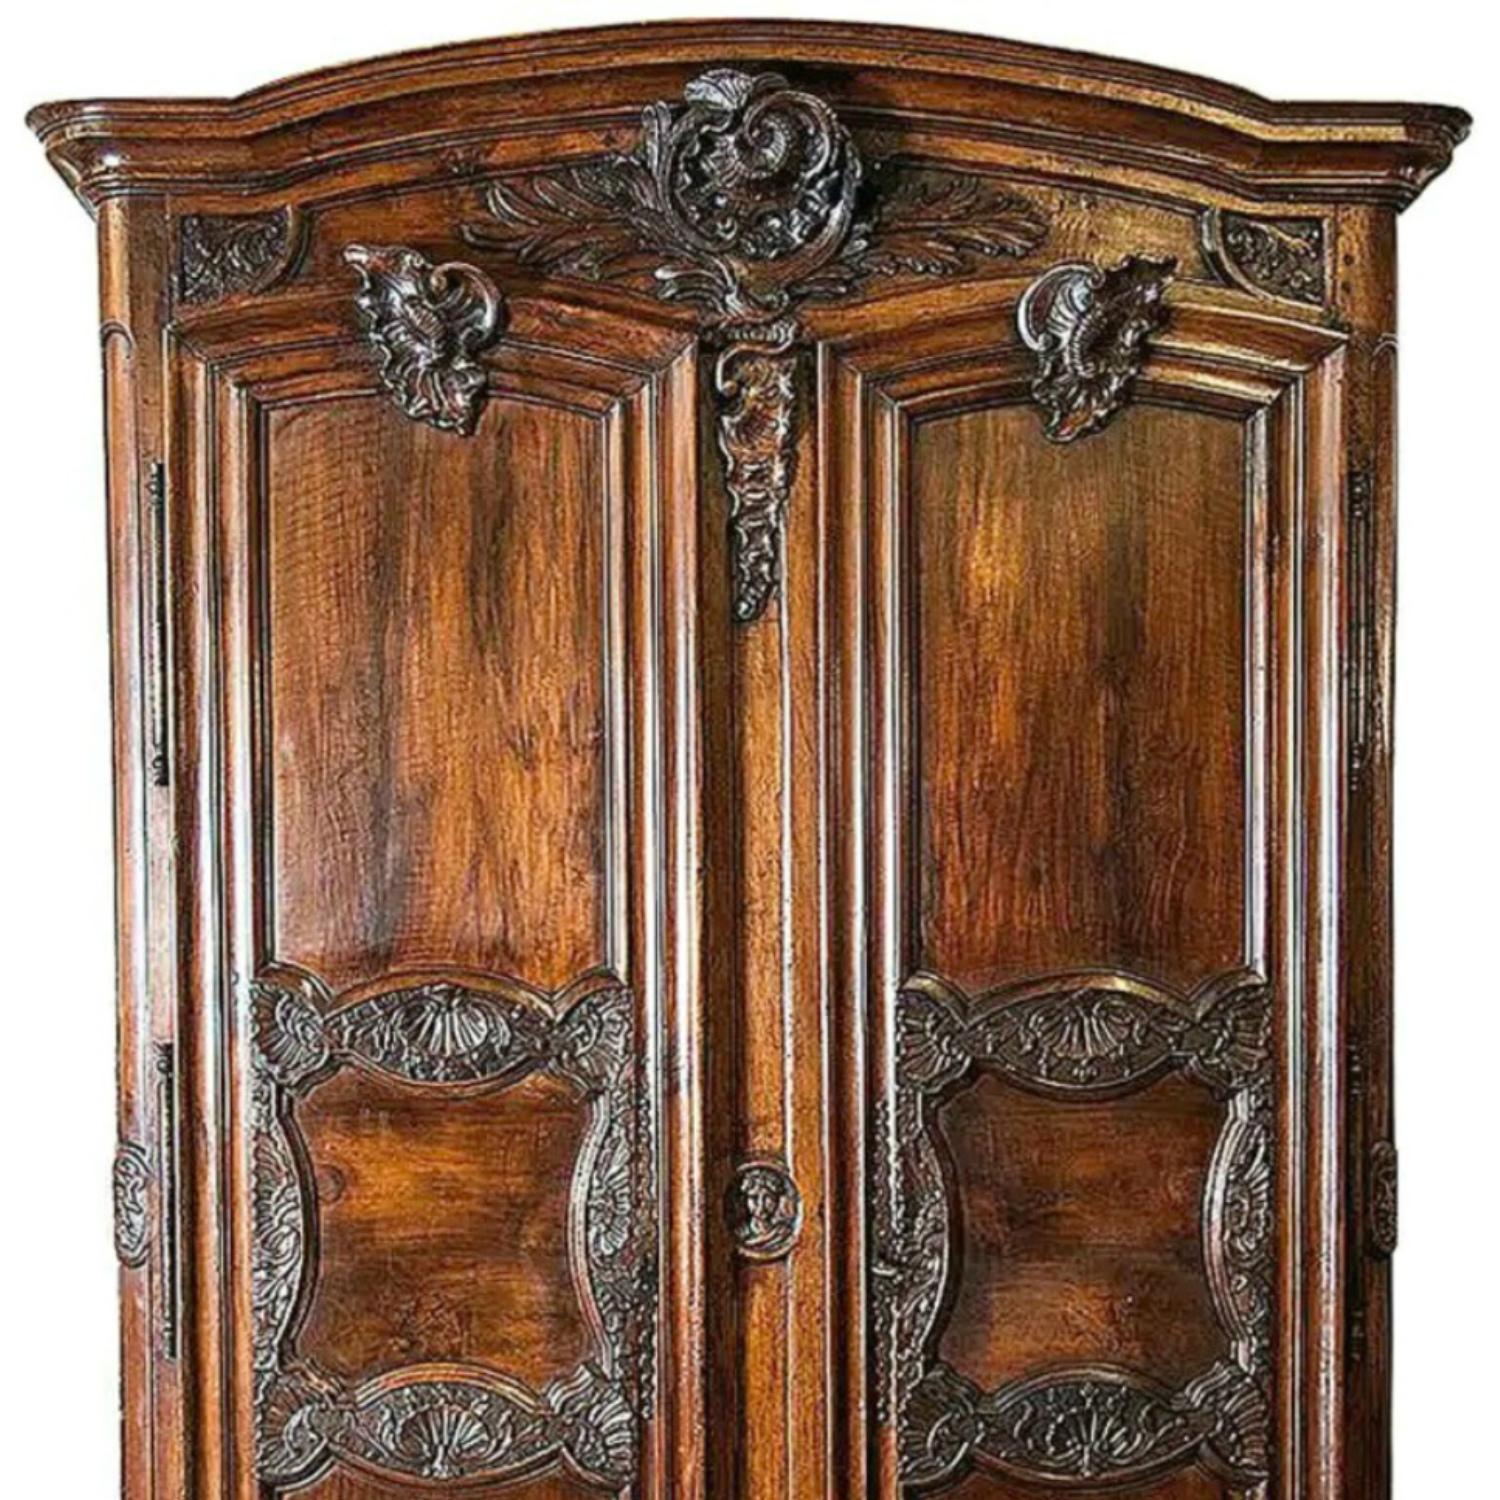 Early 18th Century Exceptional 18th Century French Régence Period Walnut Chateau Lyonnaise Armoire For Sale